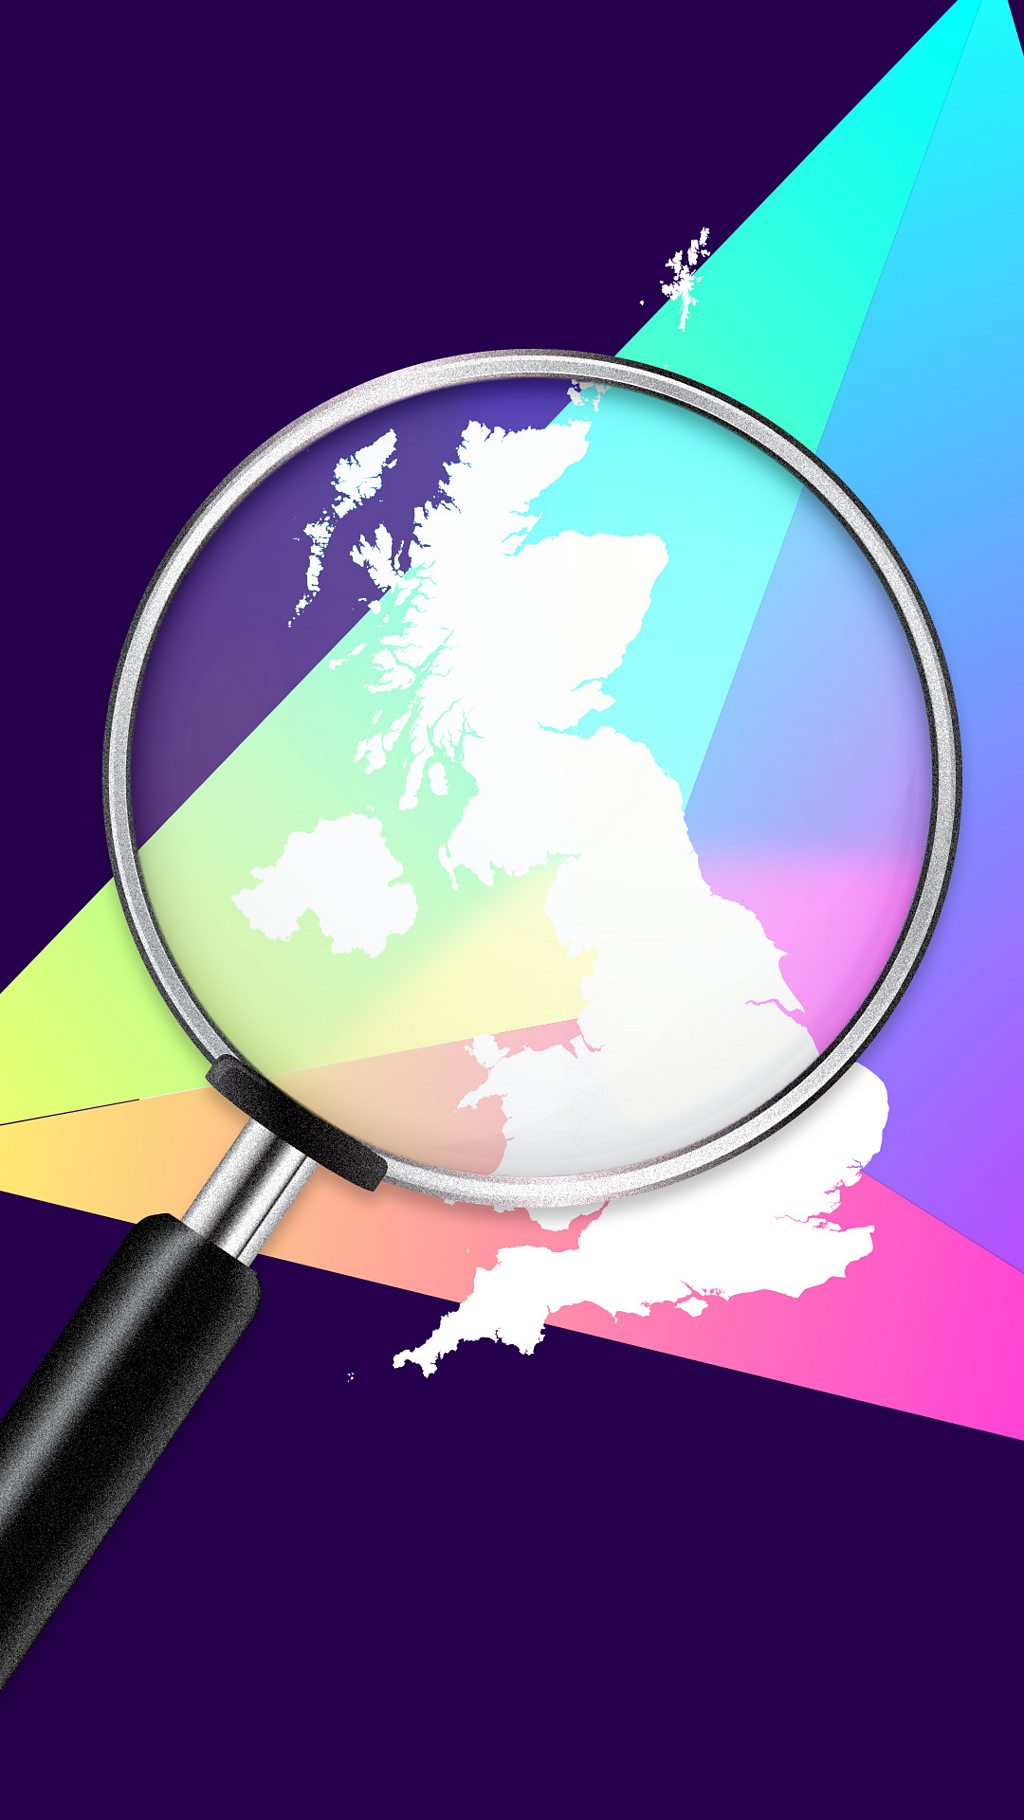 A graphic showing a map of the UK with a purple background and a magnifying glass on top